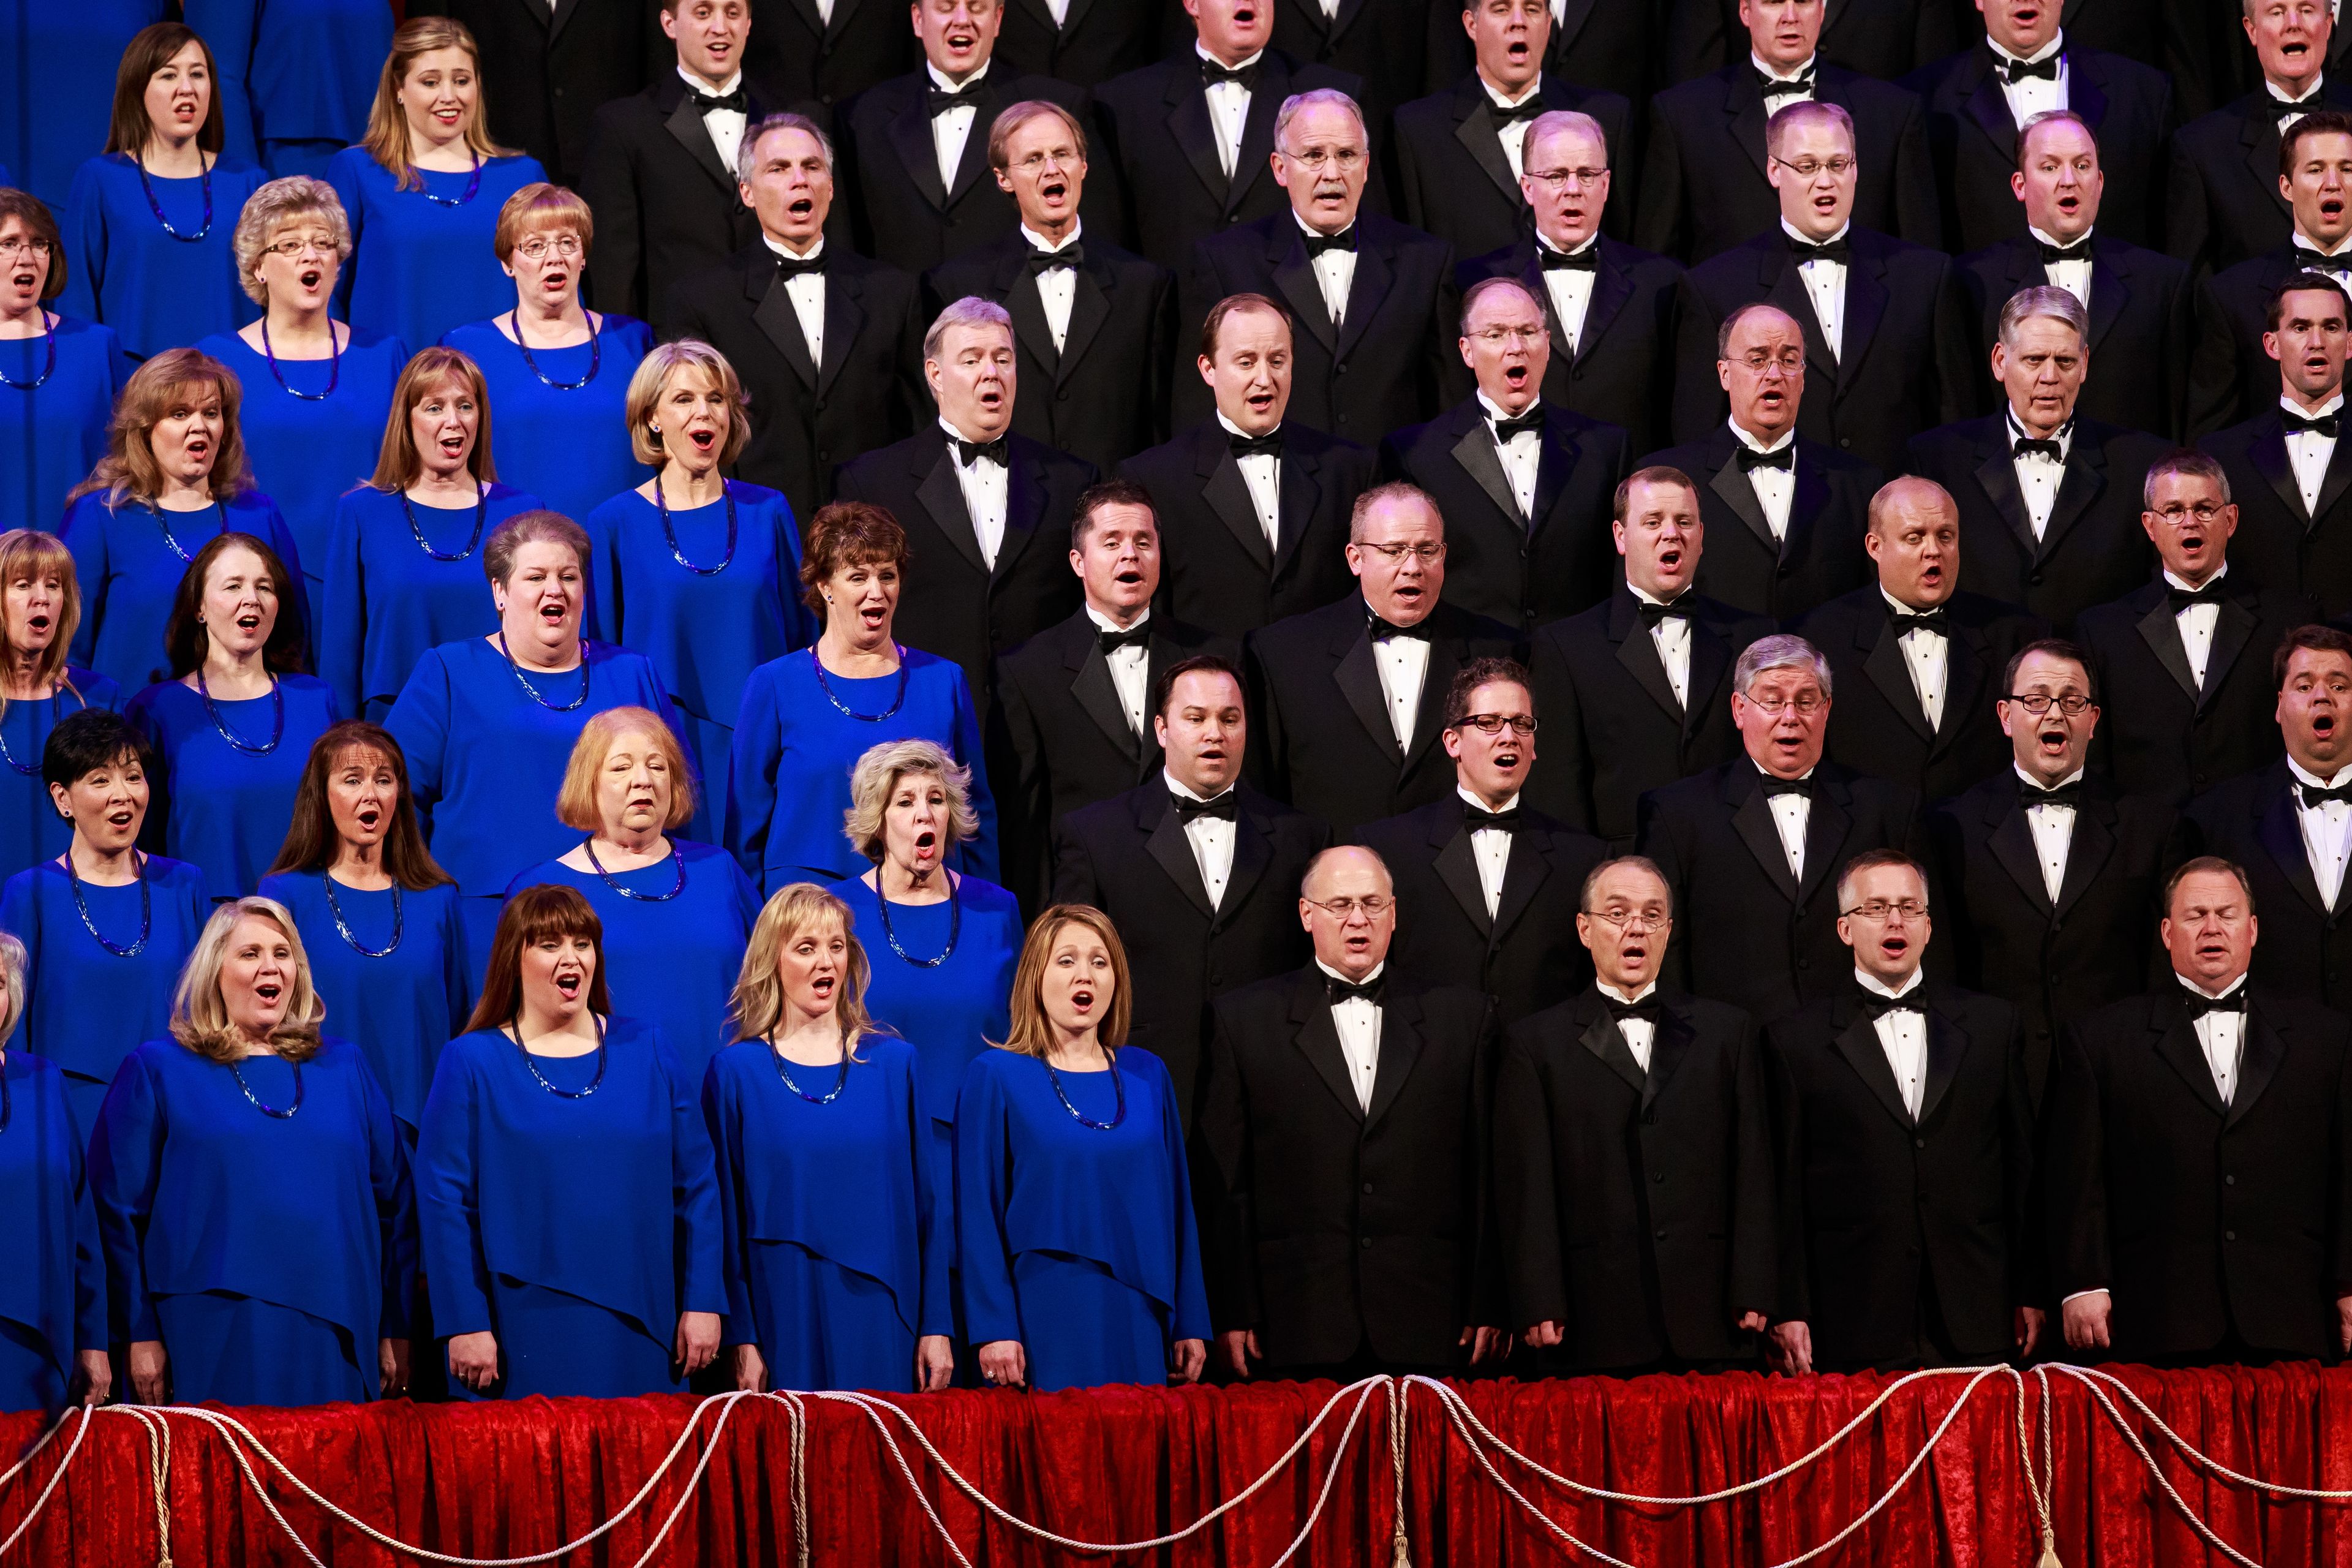 Men and women of the Mormon Tabernacle Choir singing together at the 2013 Christmas concert, featuring Deborah Voigt and John Rhys-Davies.  